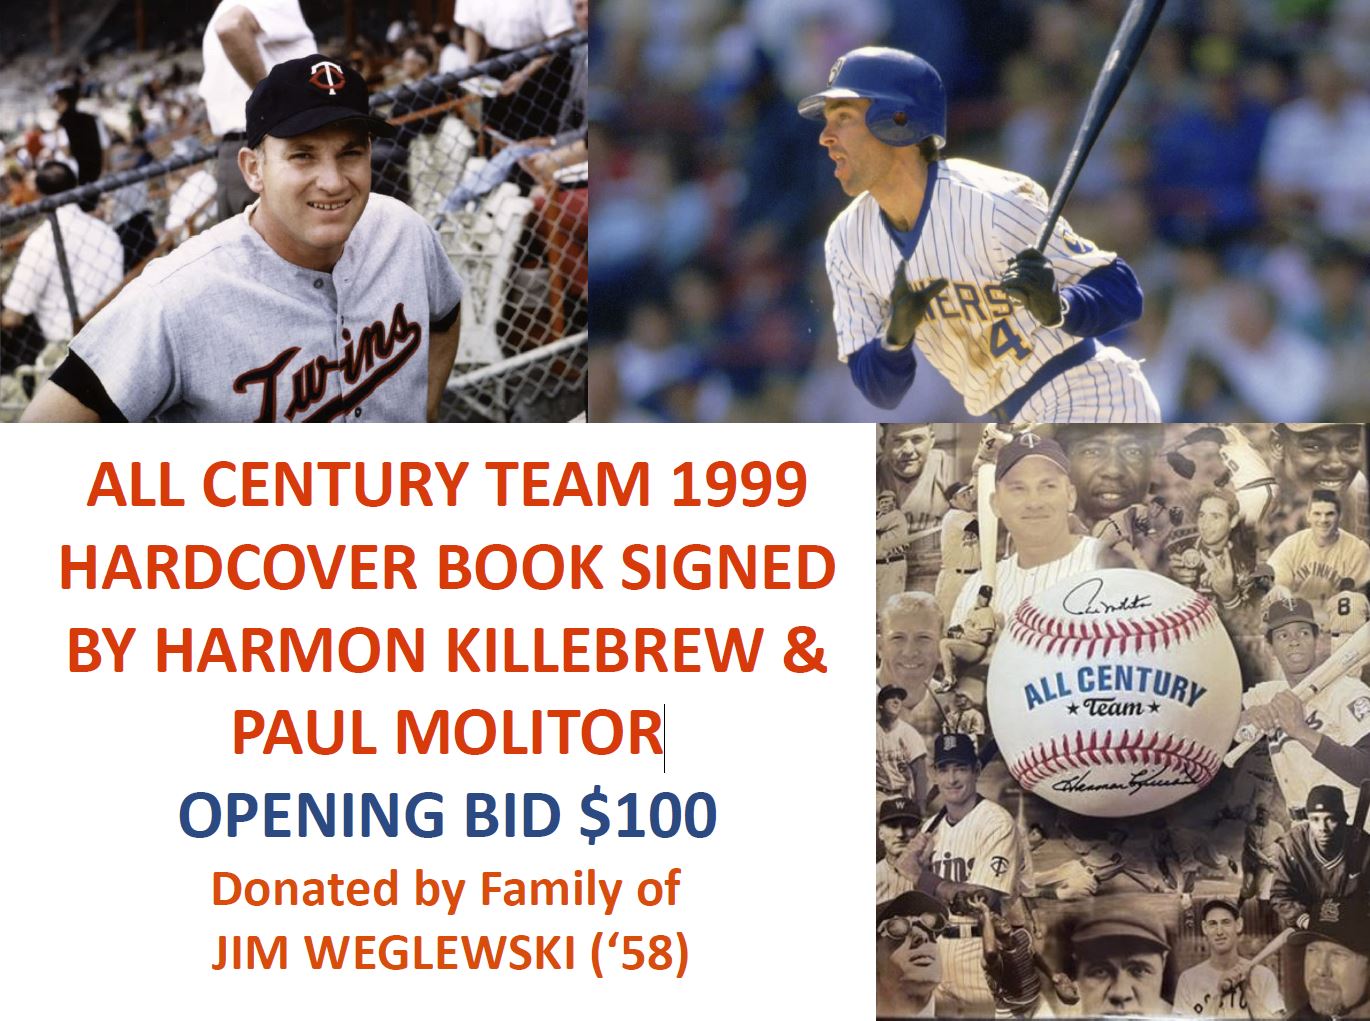 Featured image for “HARMON KILLEBREW & PAUL MOLITOR Signed Book”